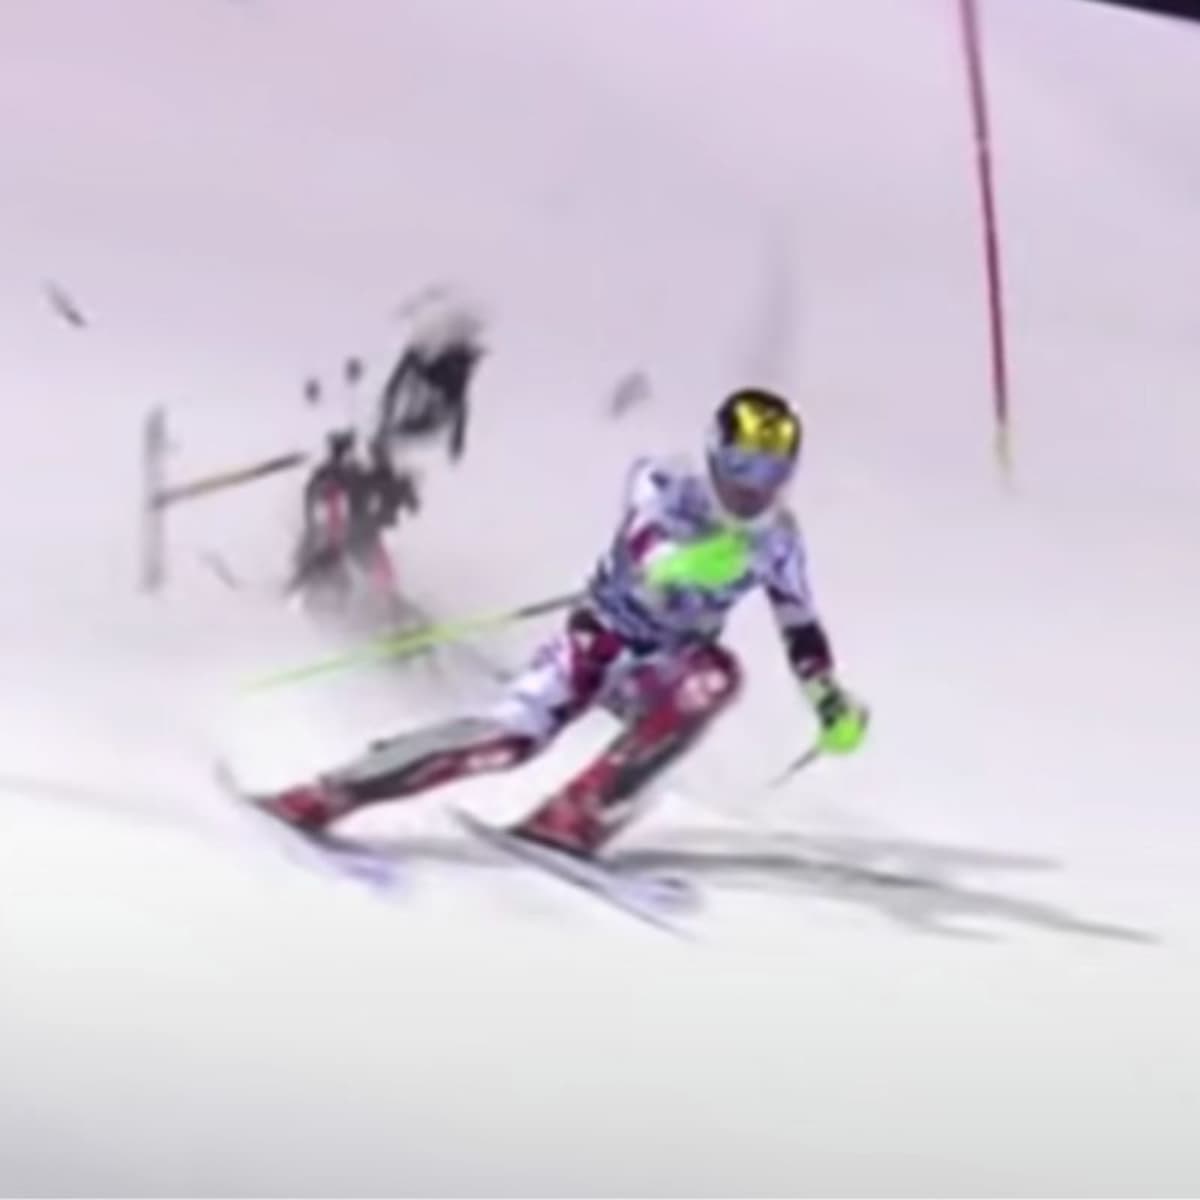 Remembering When A Drone Nearly Crashed Into A Ski Racer On Live TV